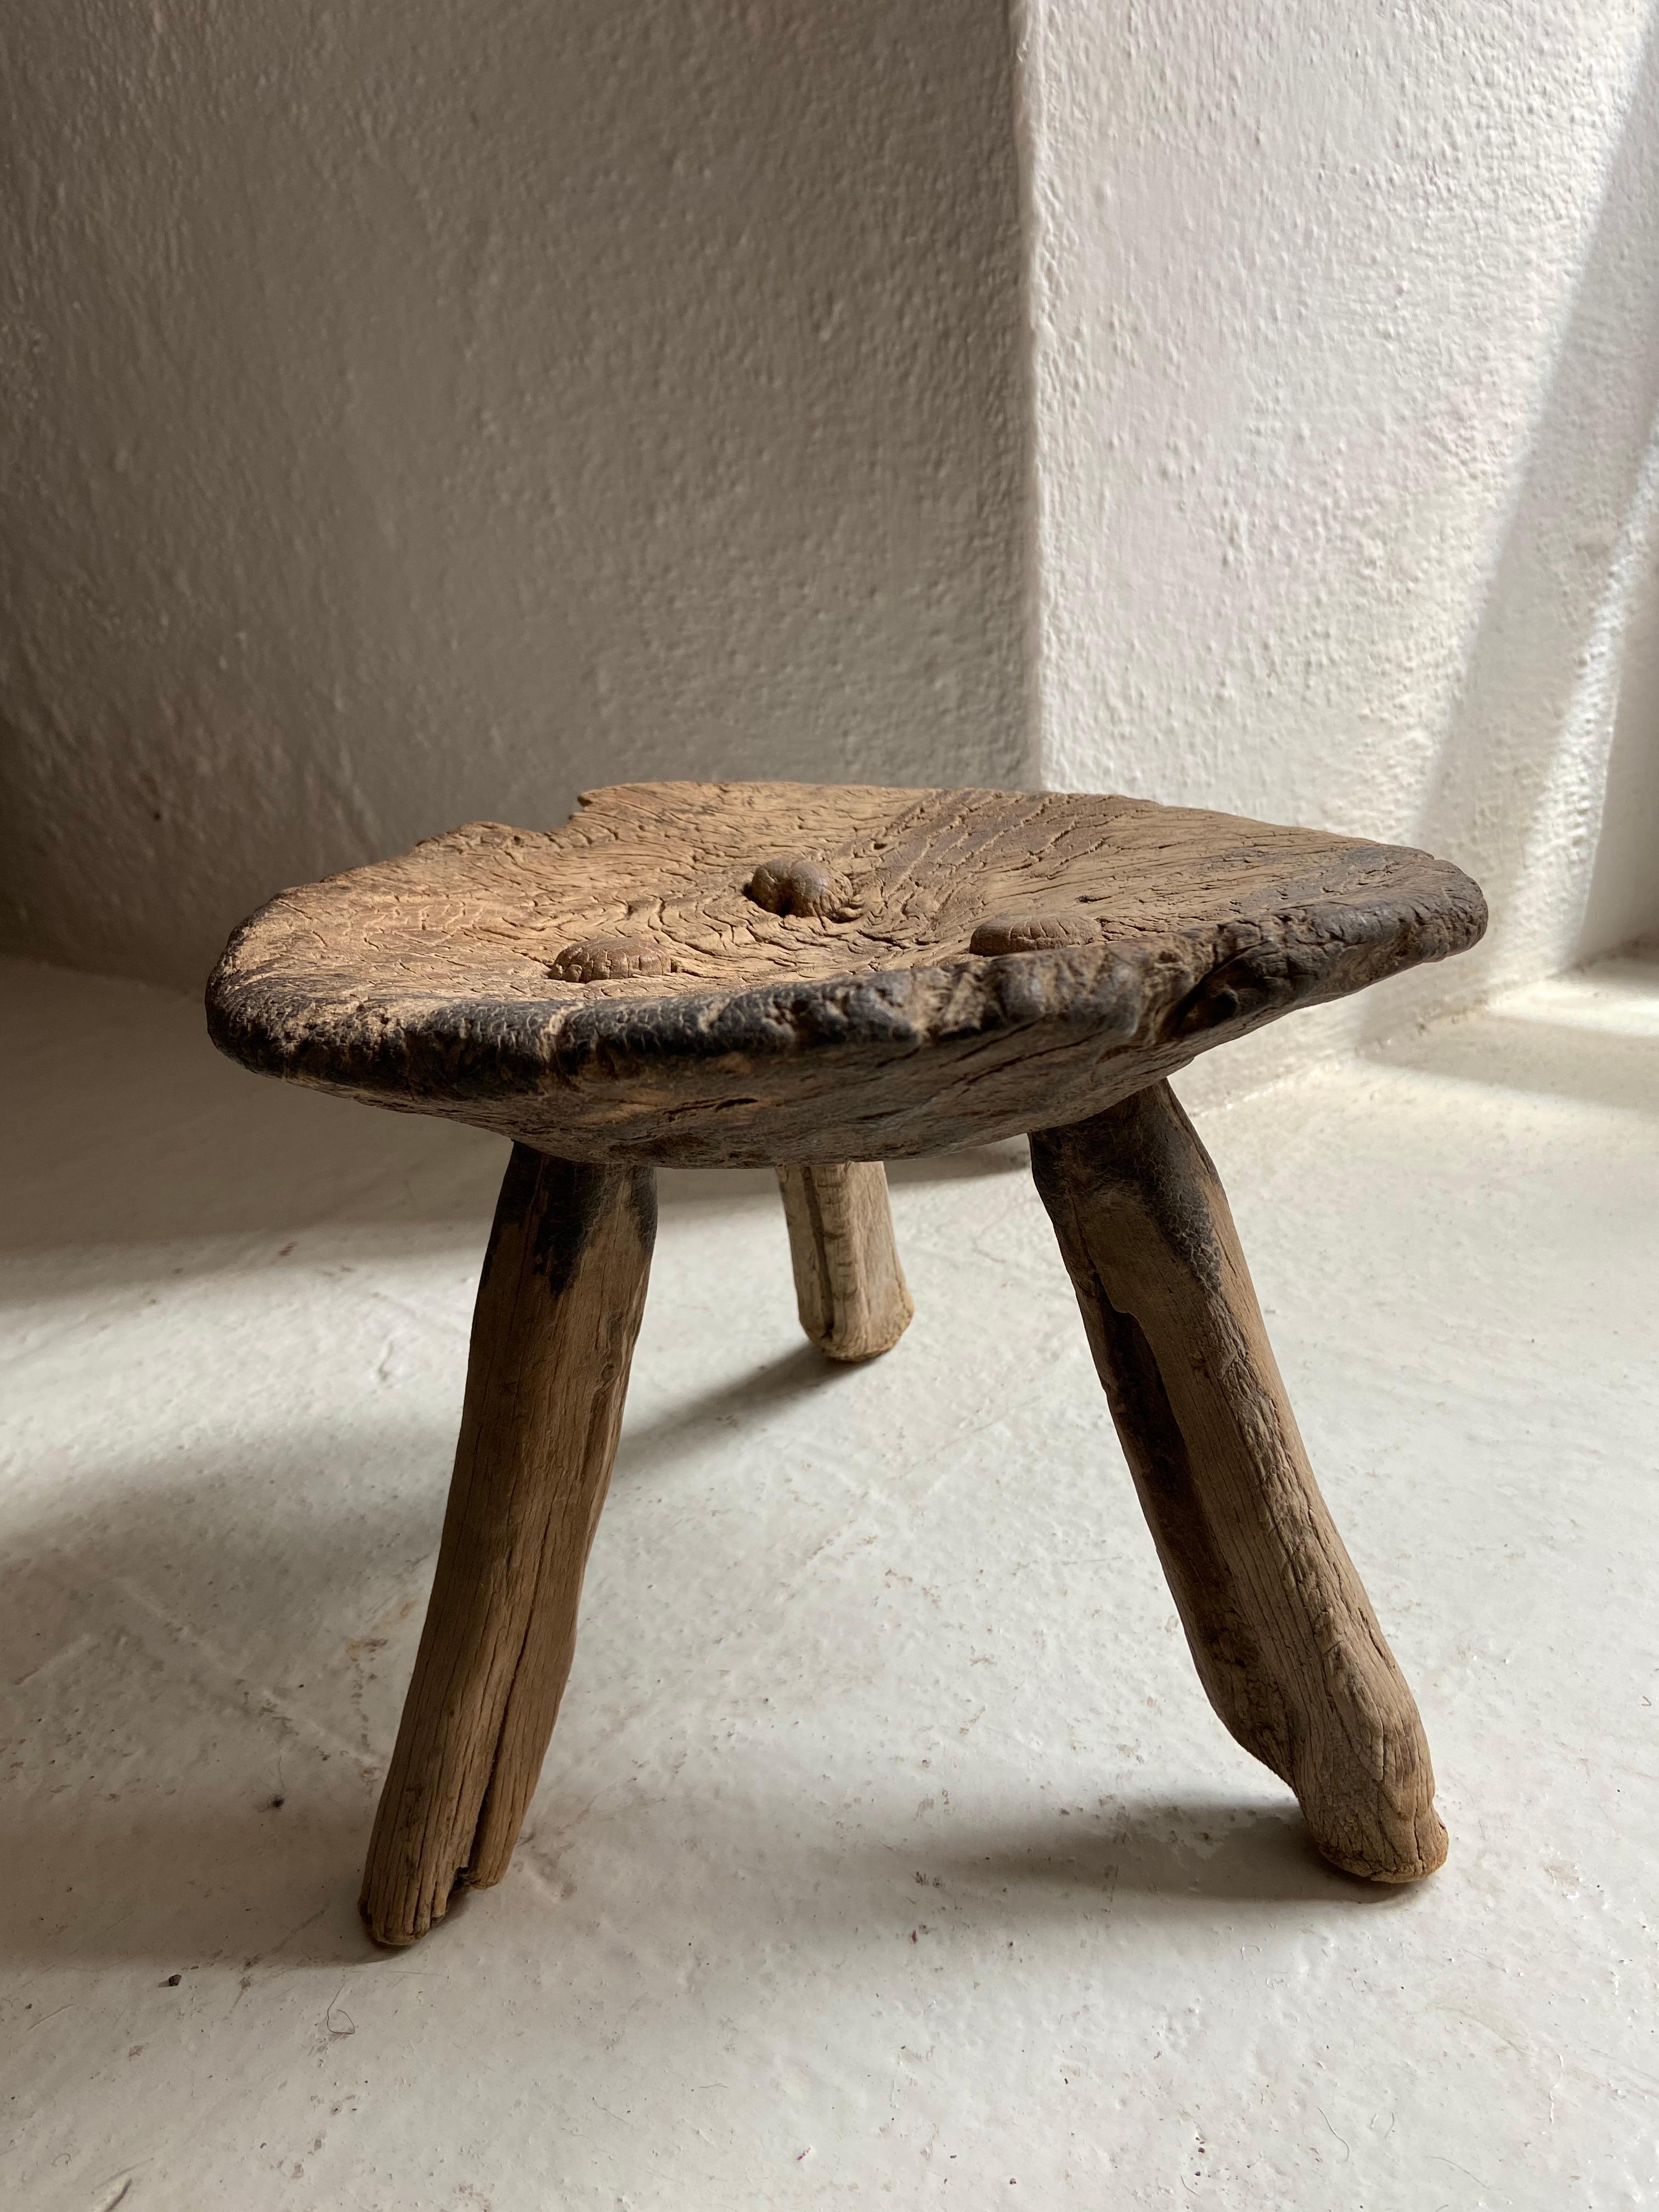 Antique mesquite stool from Venado, San Luis Potosi, Mexico, hand carved, circa early 1900s. Weathered mushroom-like patina throughout. Structurally solid with legs completely intact. All original parts.